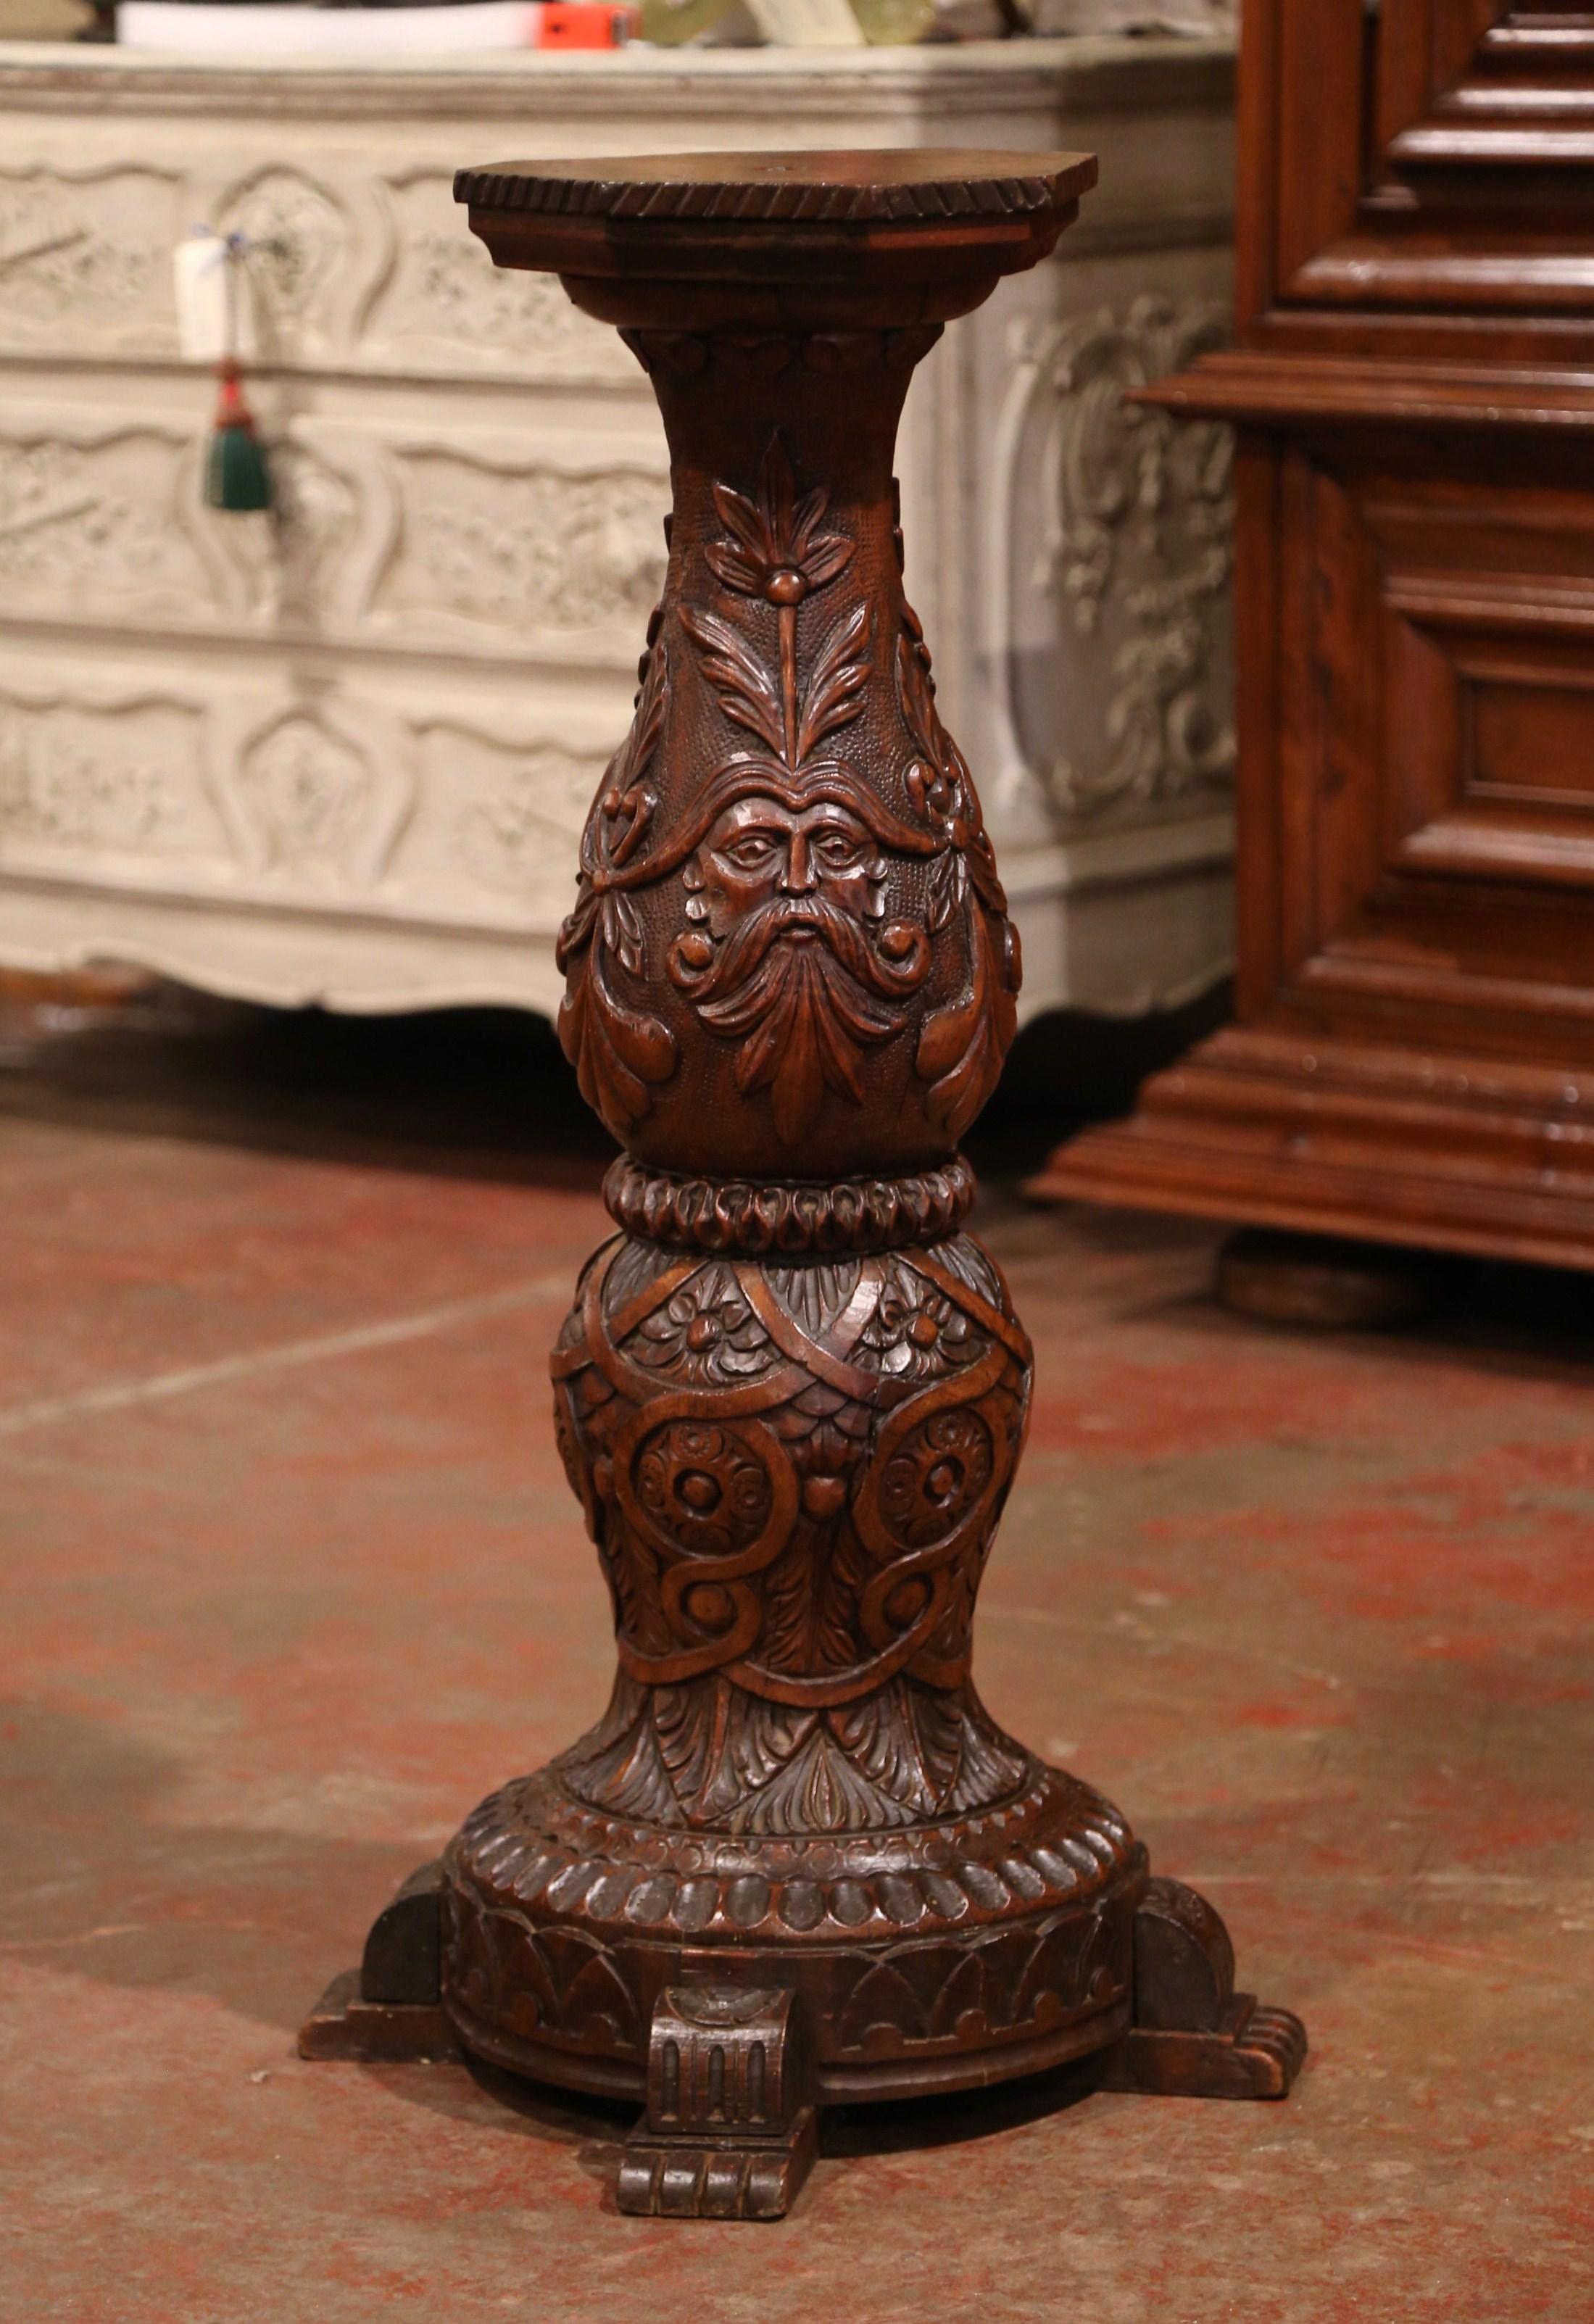 This elegant antique pedestal was crafted in northern France, circa 1870. Round in shape and made of walnut, the heavily carved column stands on four paw feet over a turned stem decorated with foliage and vine embellished with Bacchus head